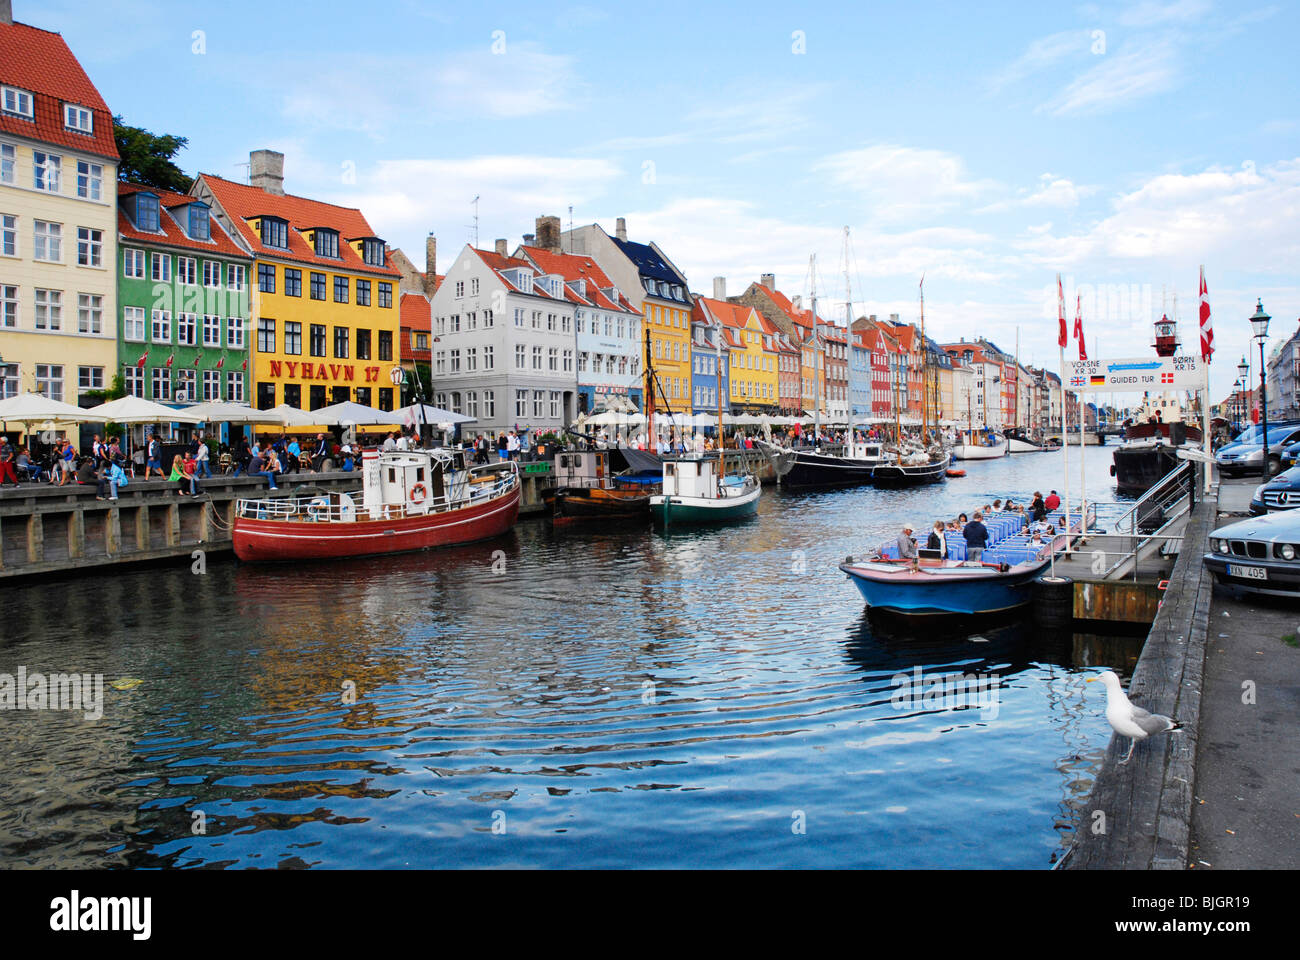 Sighteeing boat on the canal in Nyhavn, a colourful 17th century waterfront and entertainment district in Copenhagen, Denmark. Stock Photo